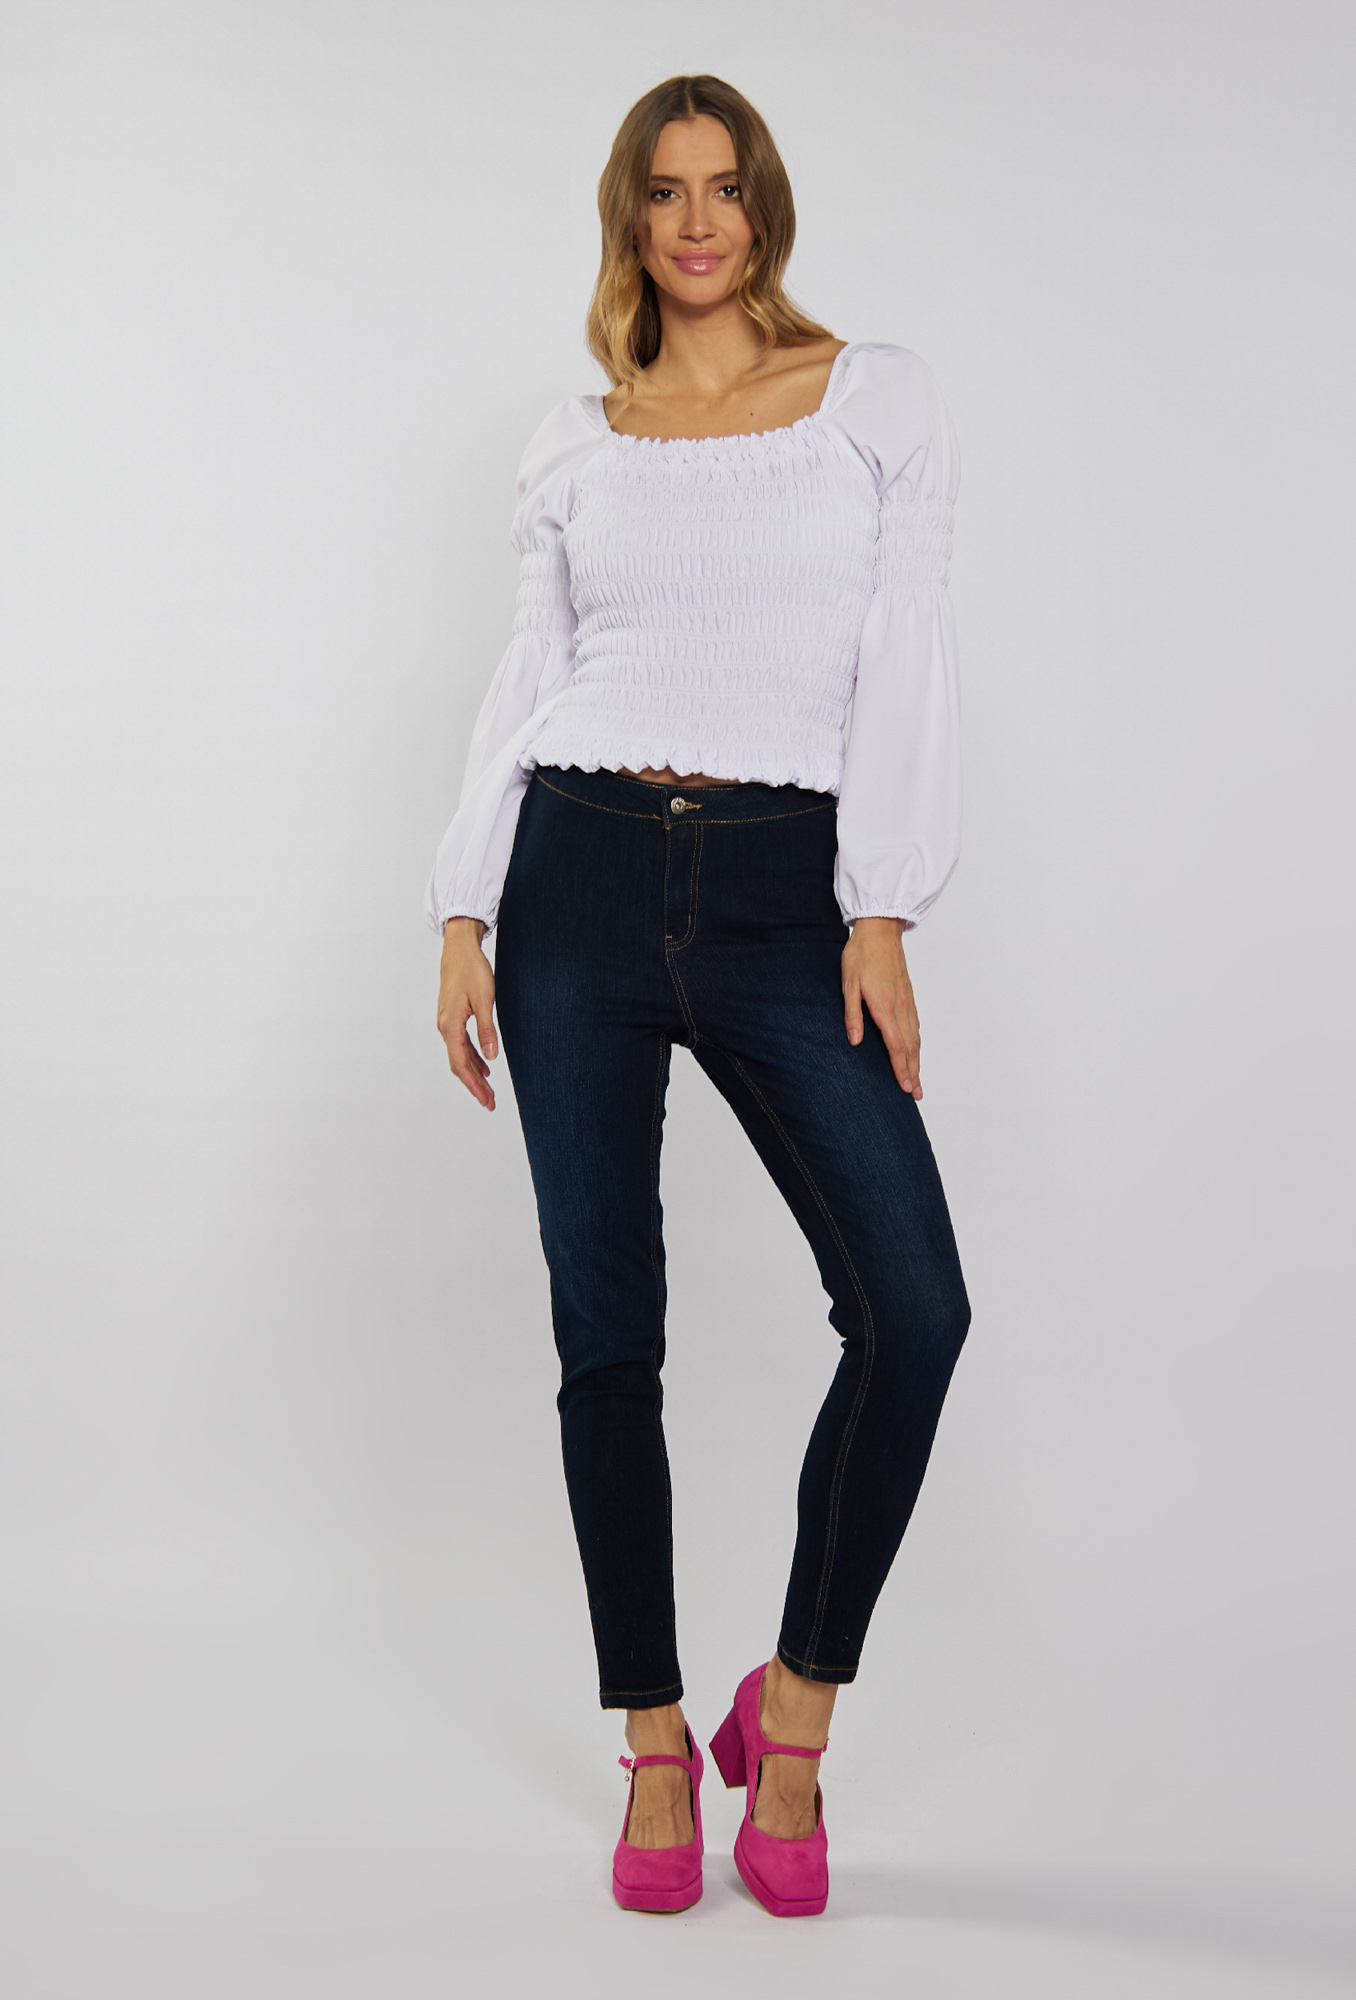 MONNARI Woman's Jeans High-Waisted Jeans